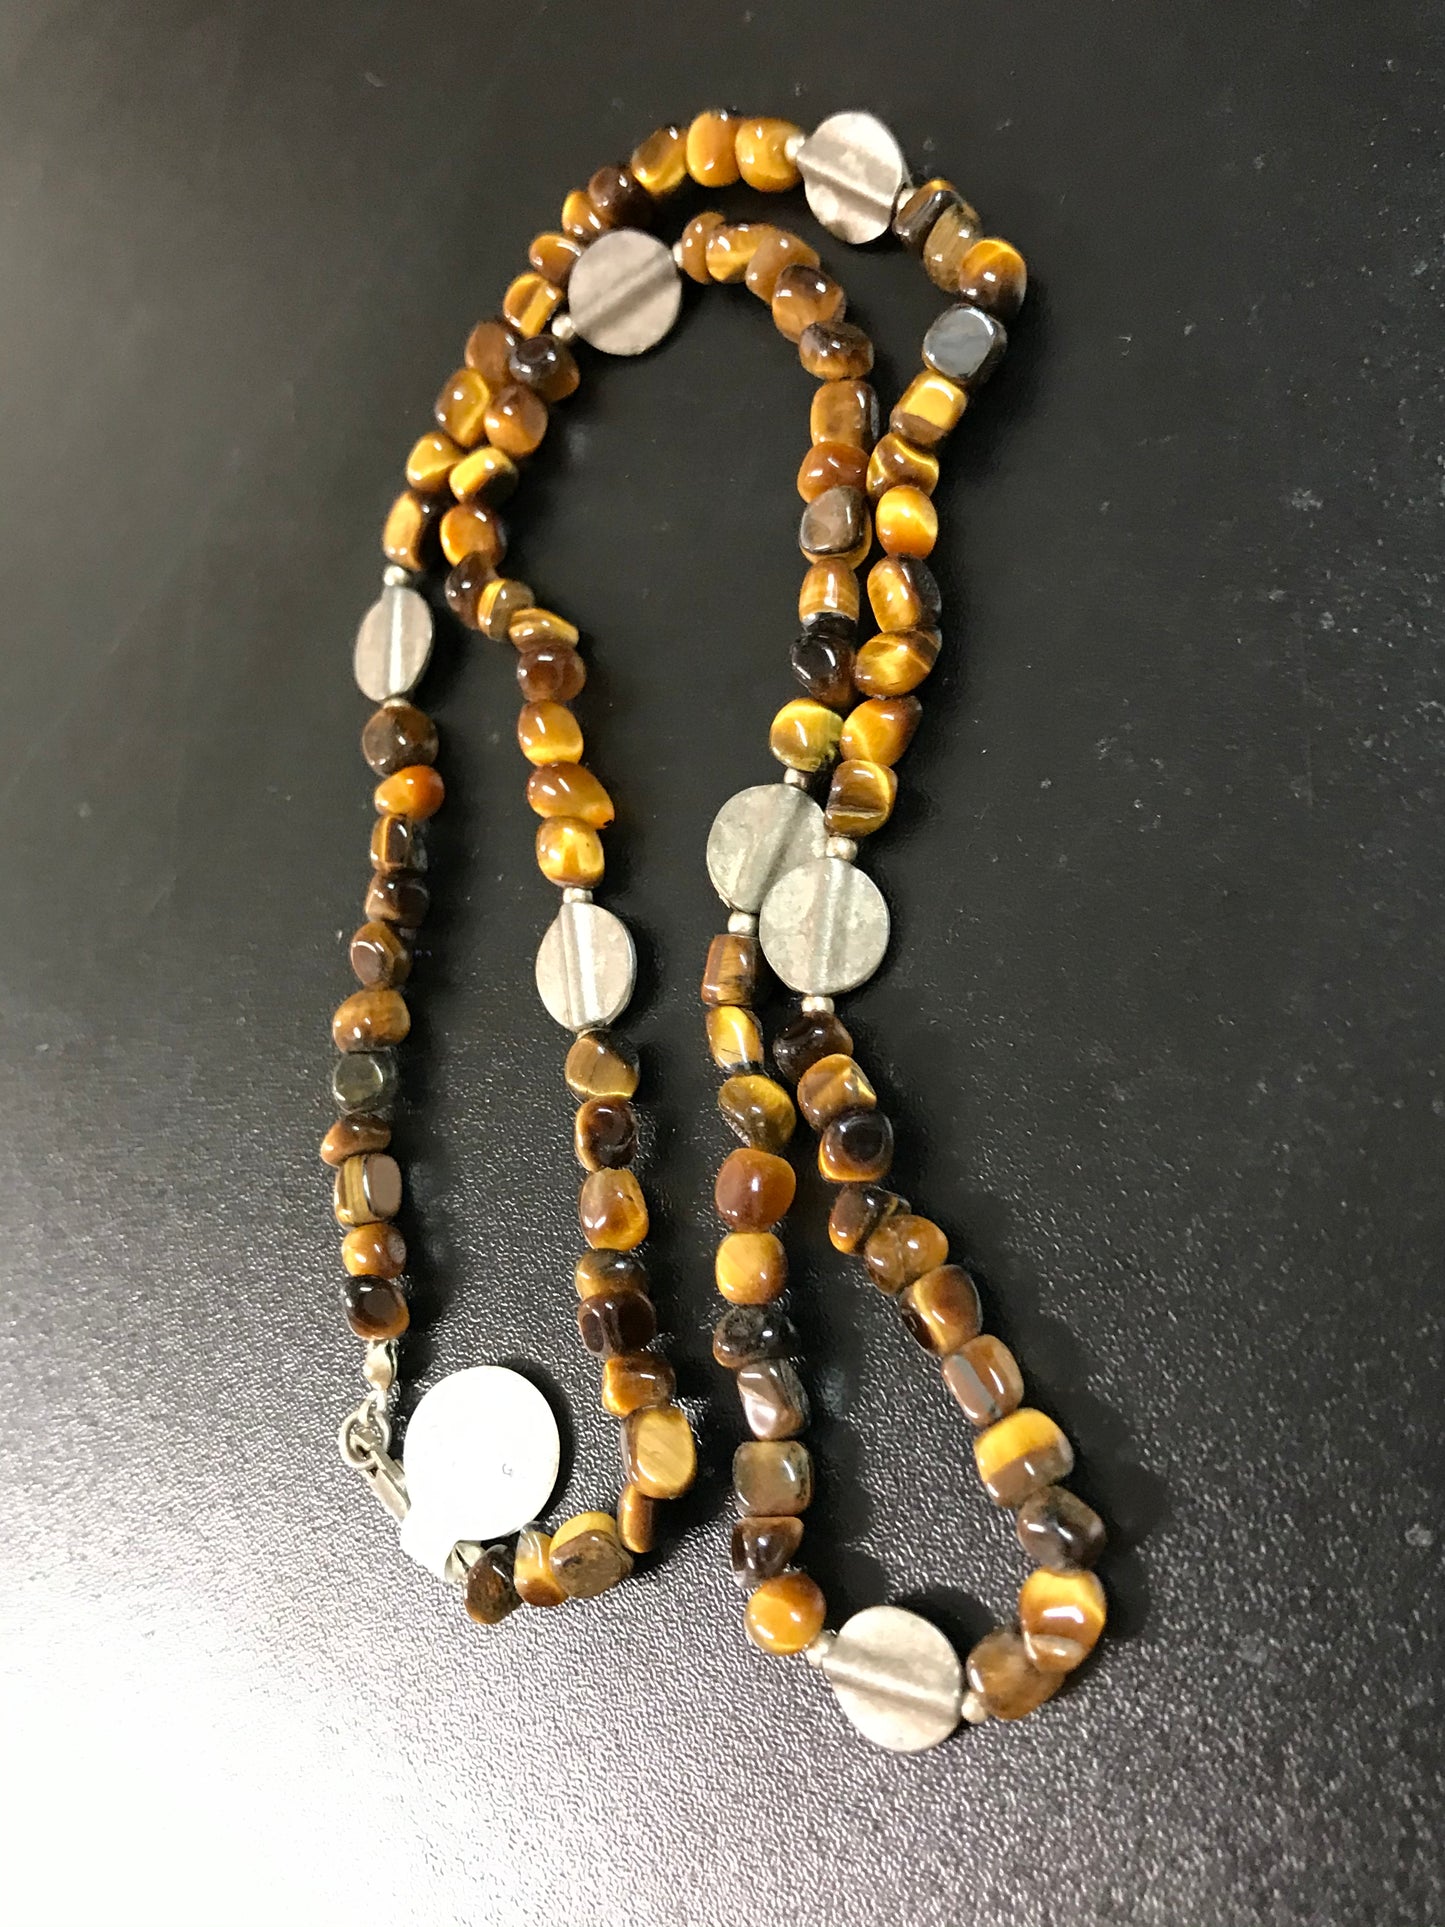 21" Sterling Silver And Tigerseye Necklace